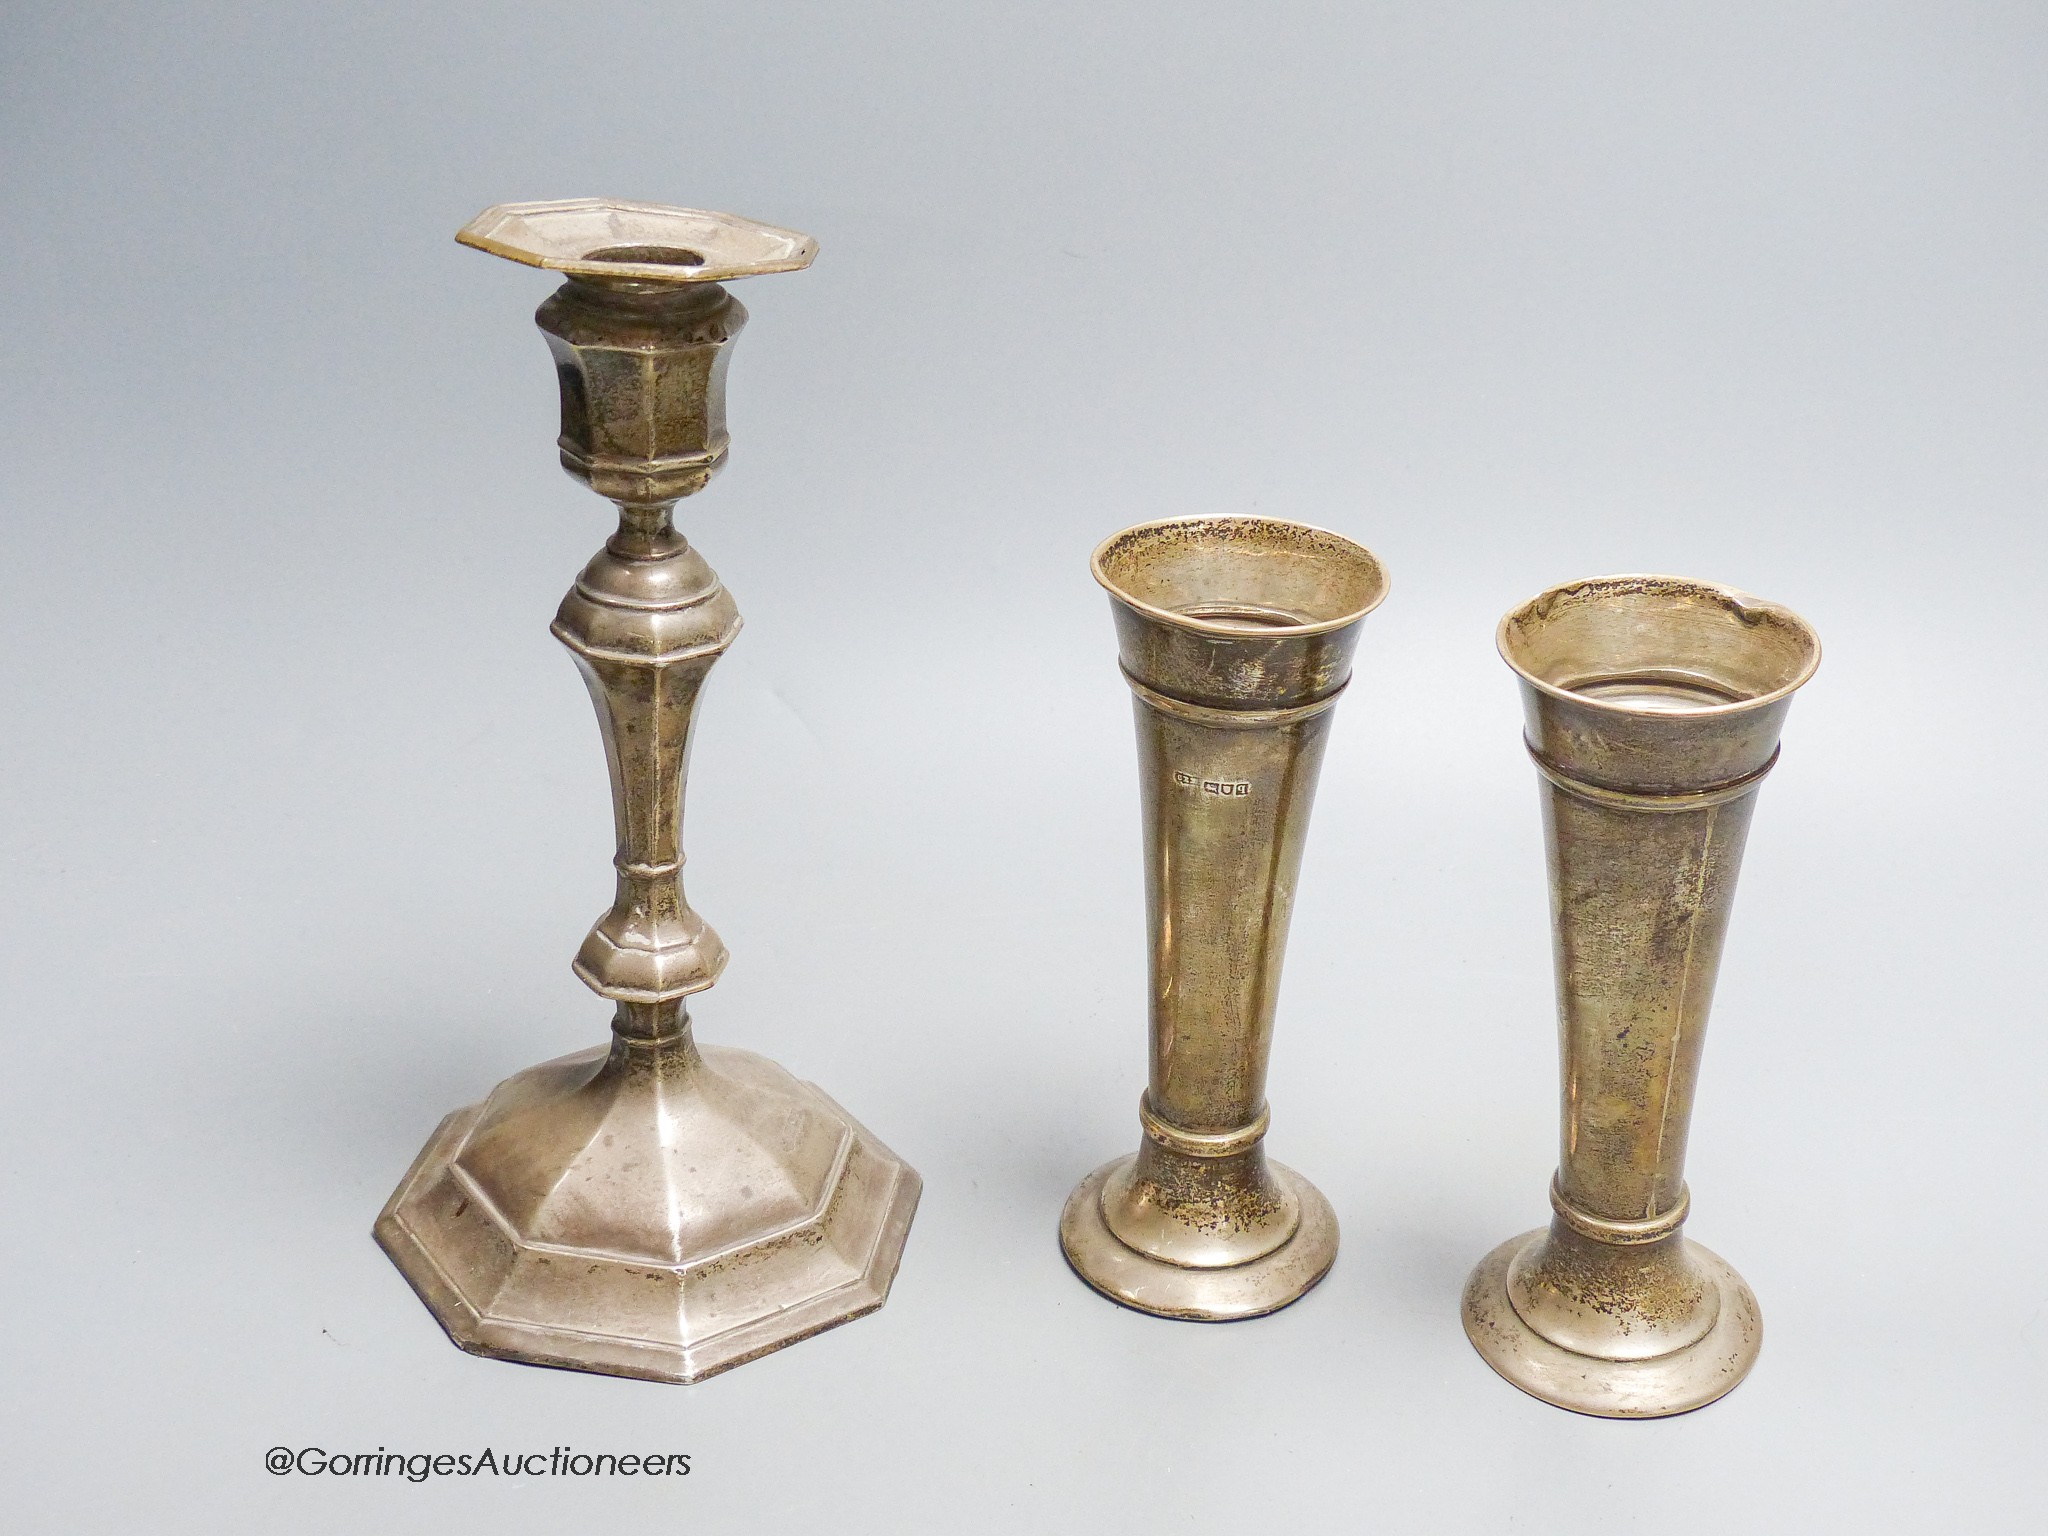 A George V silver mounted candlestick, William Hutton & Sons, Sheffield, 1912, height 20.5cm, weighted and a pair of silver posy vases, London, 1911, weighted.